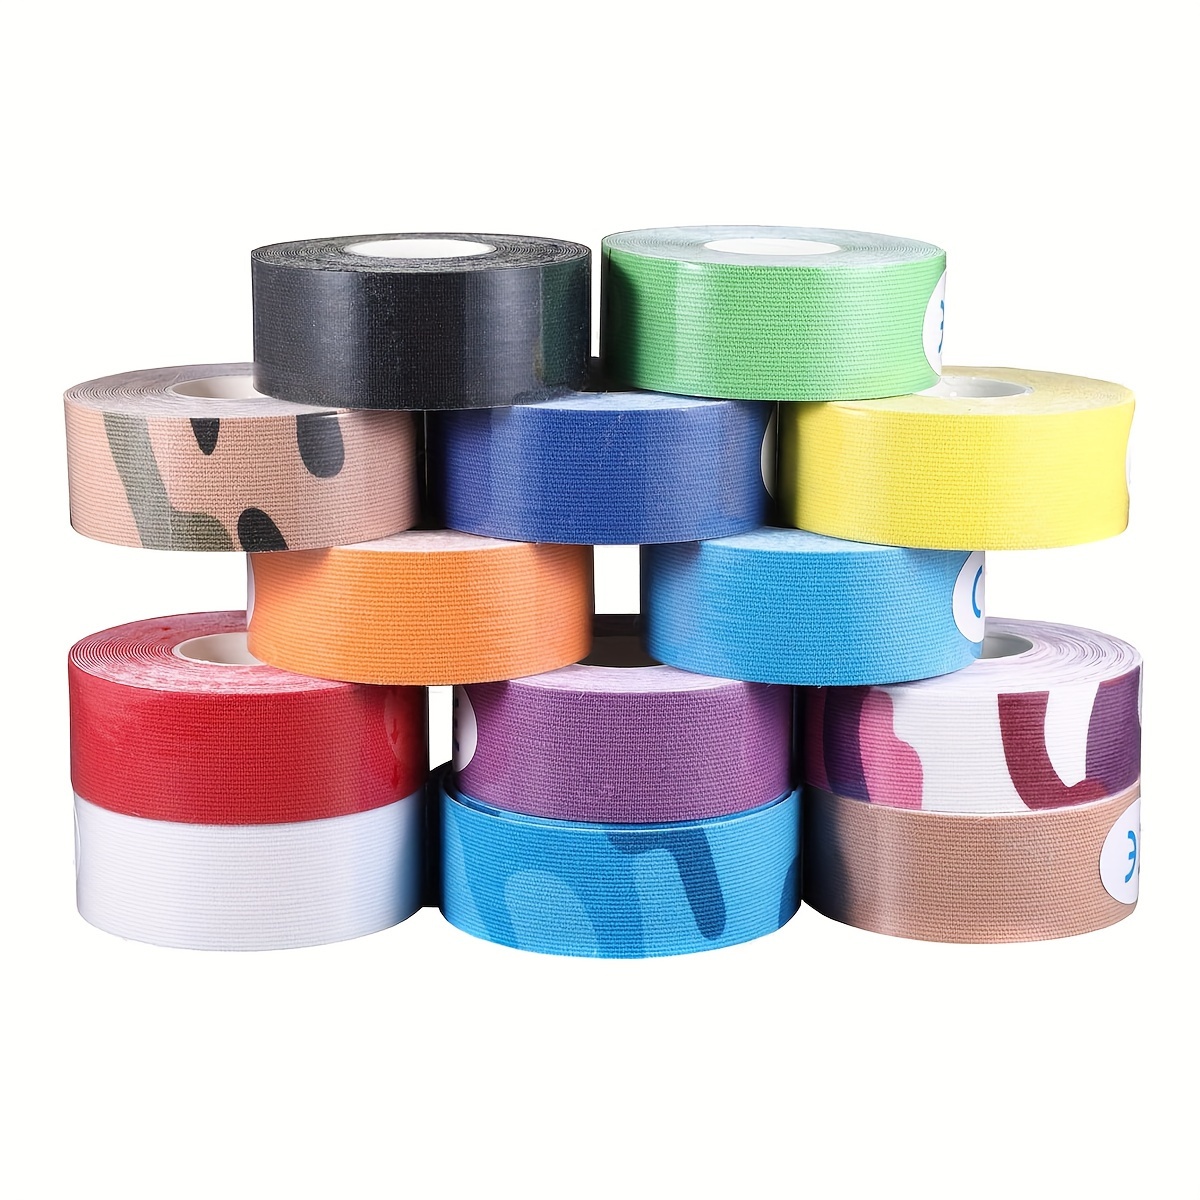 OK TAPE Kinesiology Tape for Kids(5.9 in 32 Strips), Hypoallergenic,  Breathable, Gentle Removal, Suitable for Basketball, Baseball, Rugby and  Other